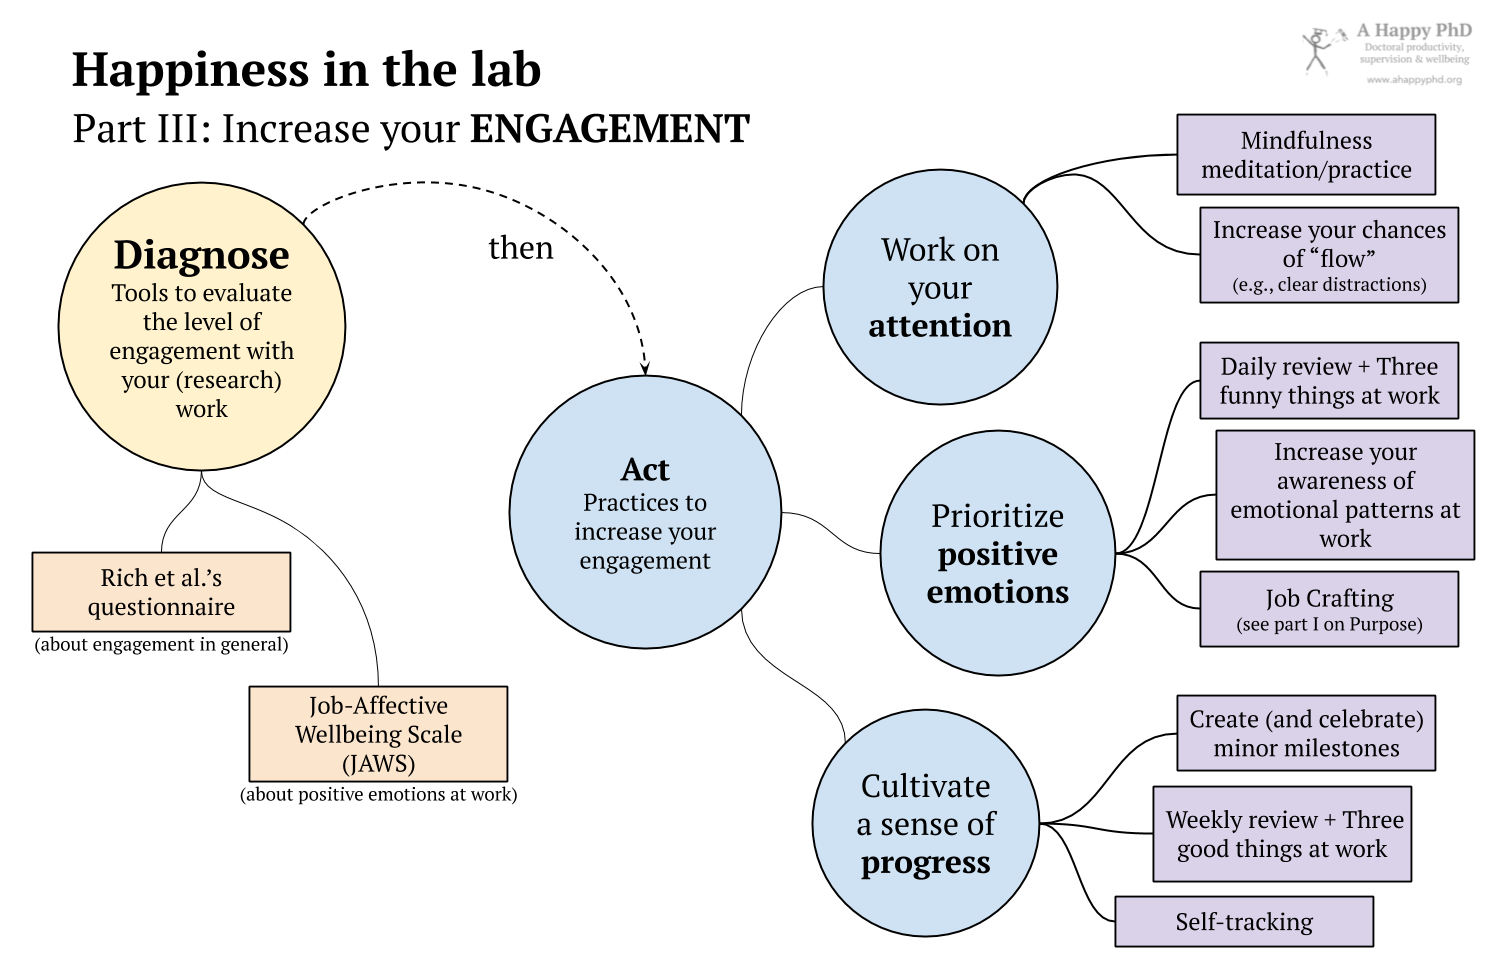 Steps and resources to diagnose and improve your engagement at work